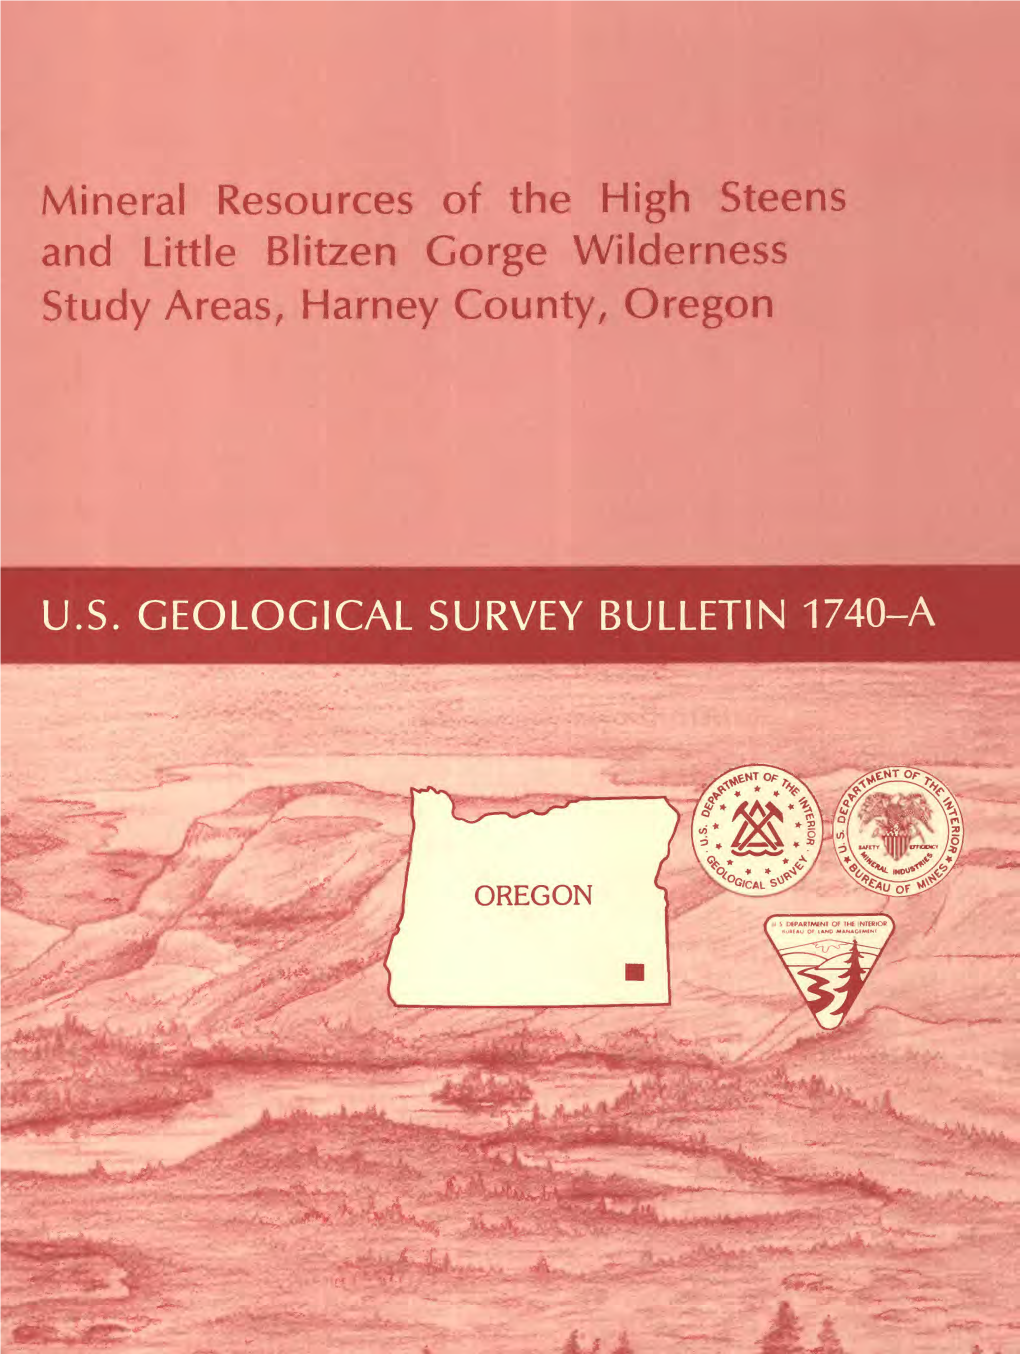 Mineral Resources of the High Steens and Little Blitzen Gorge Wilderness Study Areas, Harney County, Oregon